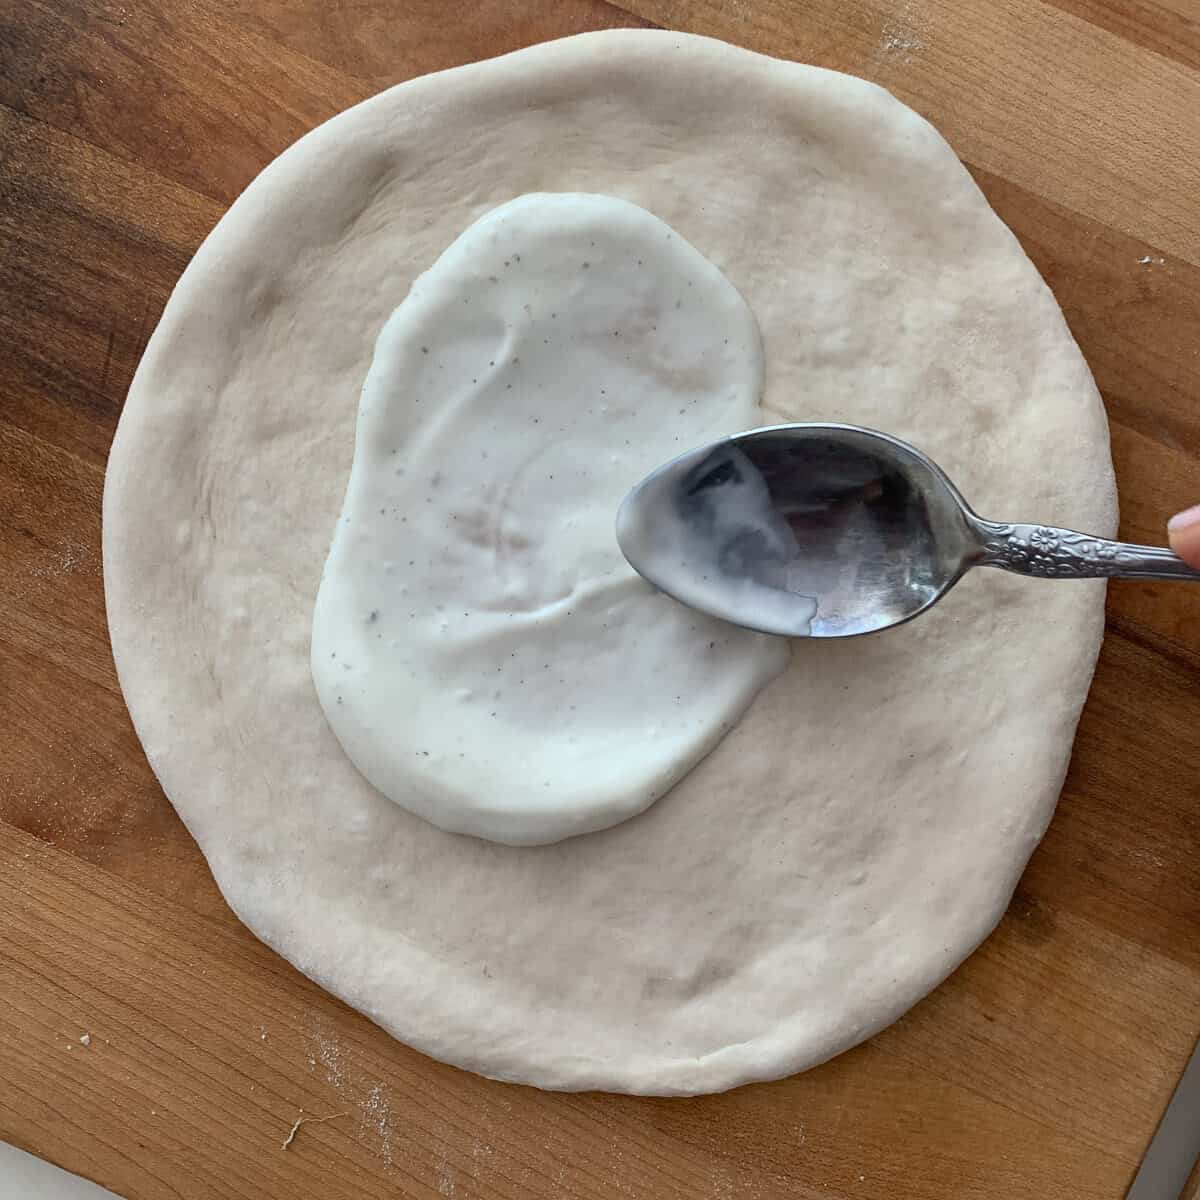 Spreading ranch dressing on pizza dough with spoon